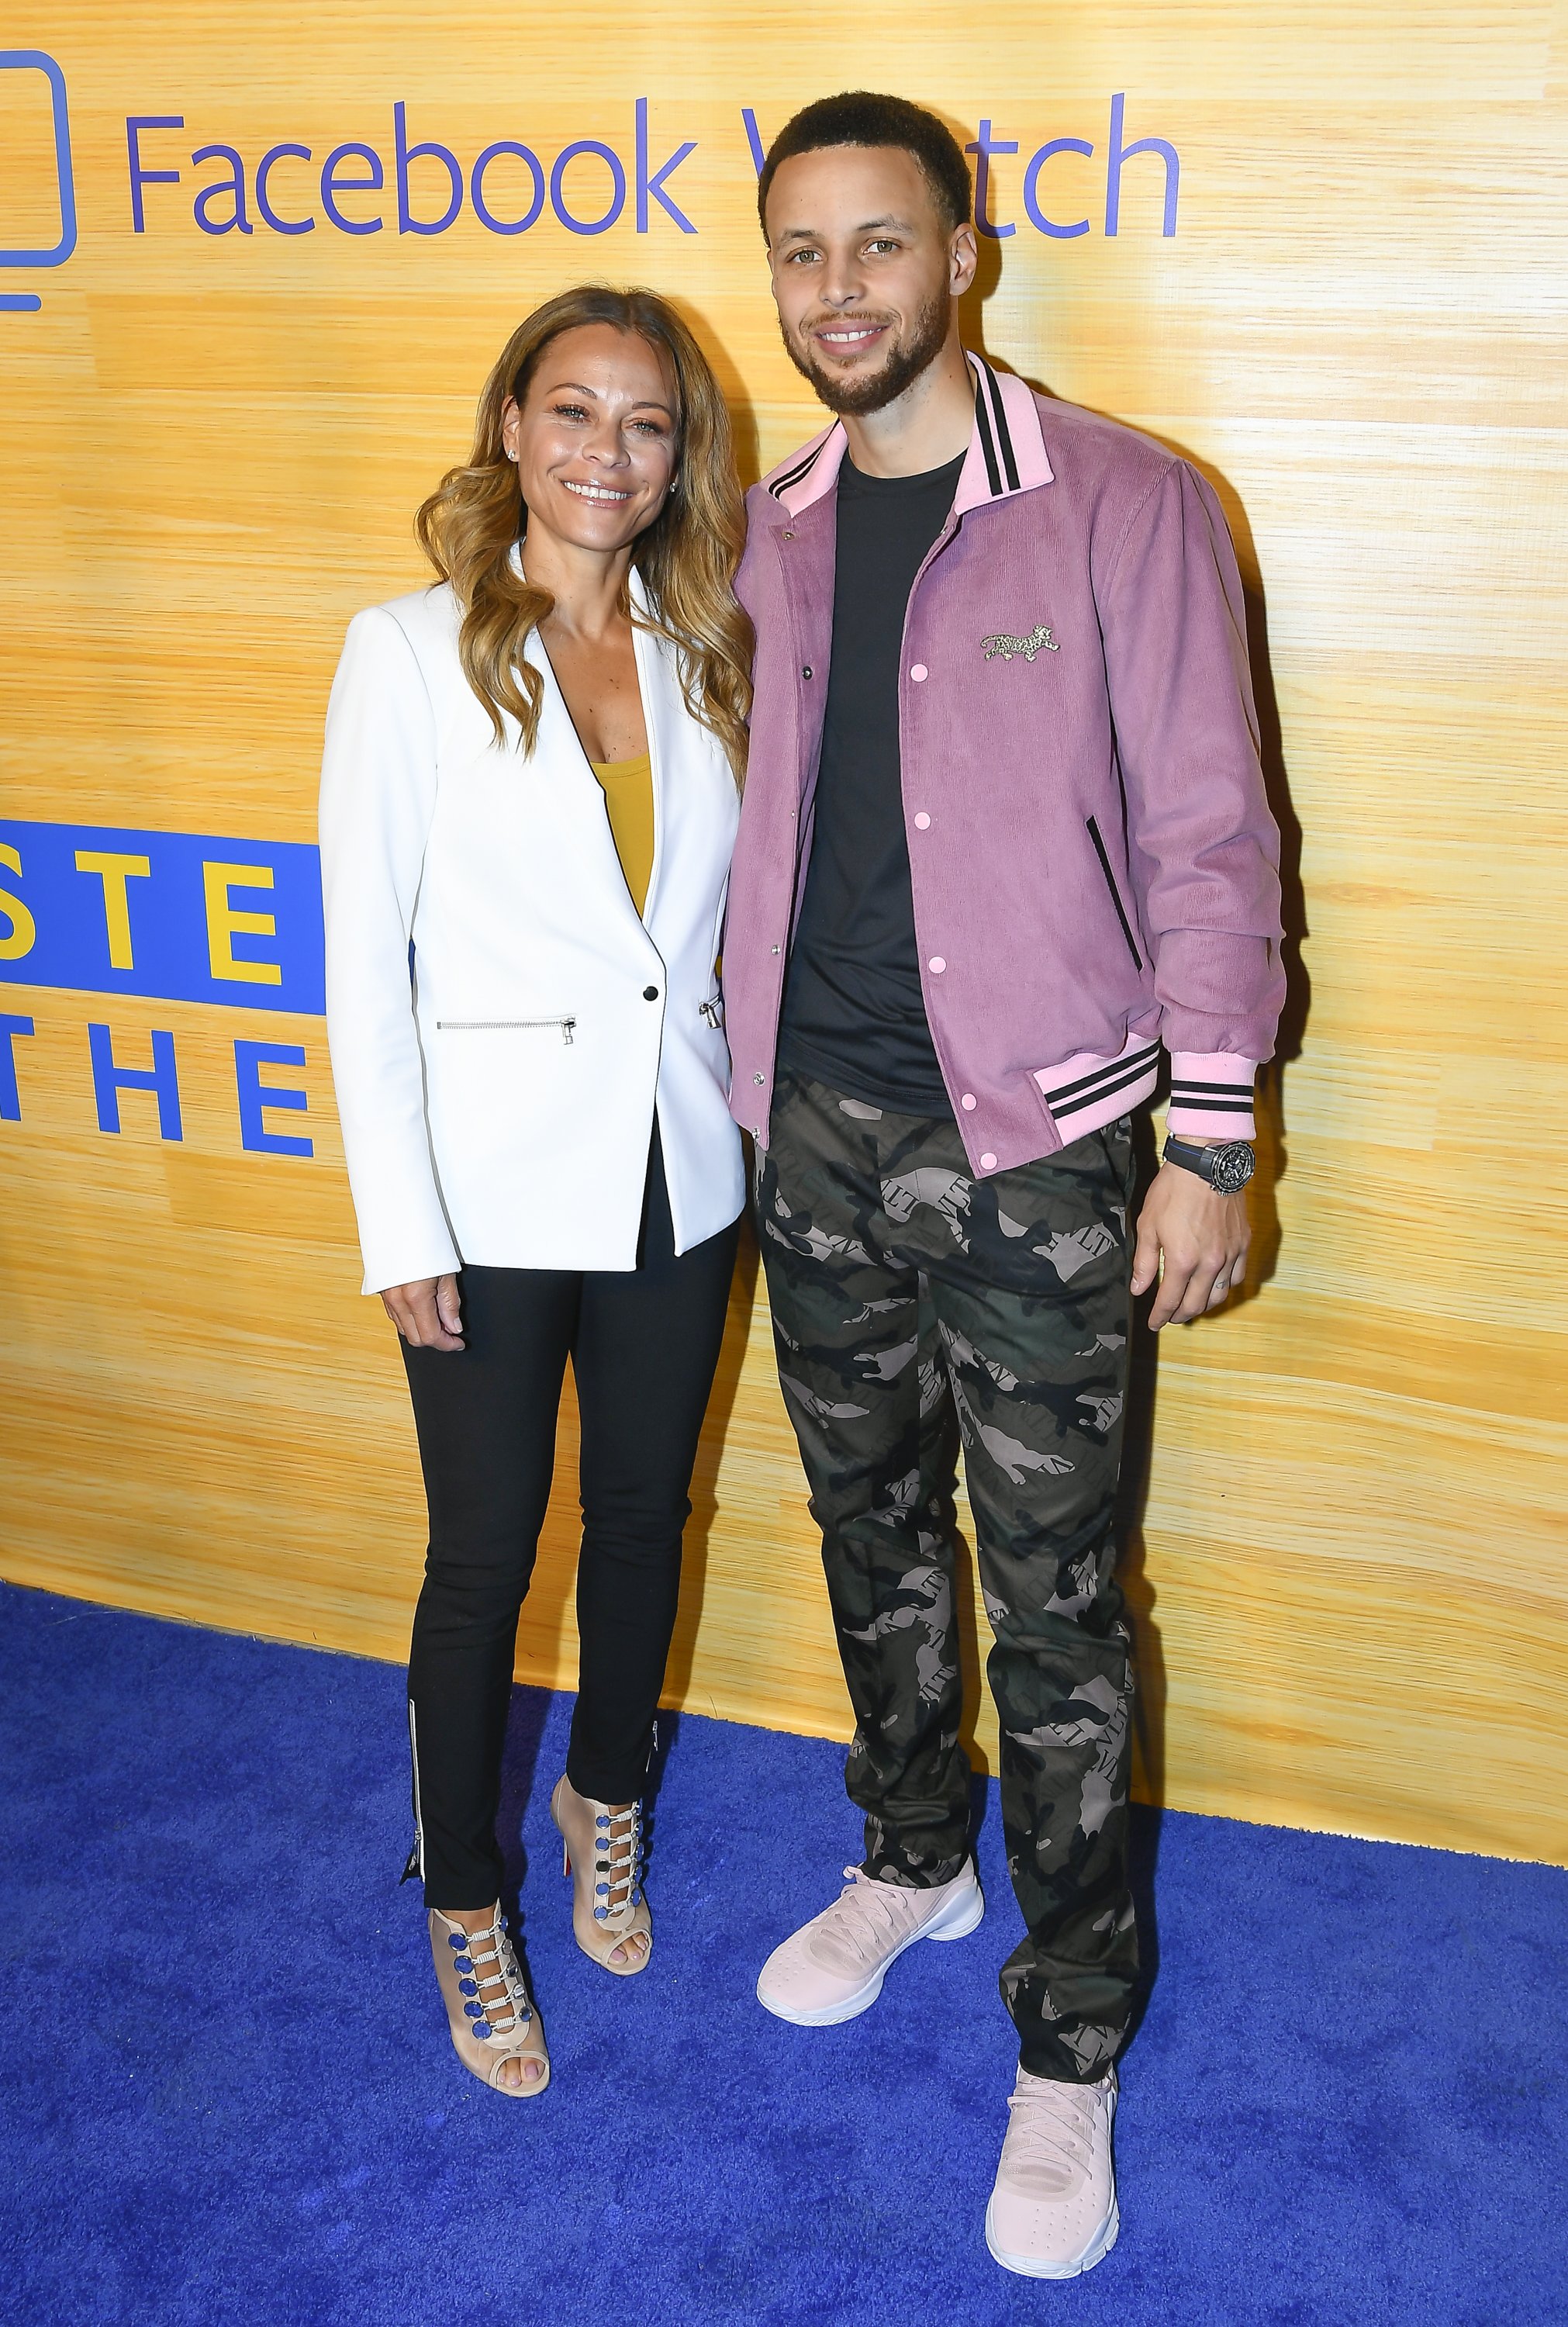 Sonya Curry and NBA Player Stephen Curry of the Golden State Warriors attend the "Stephen Vs The Game" Facebook Watch Preview at 16th Street Station on April 1, 2019  | Photo: GettyImages